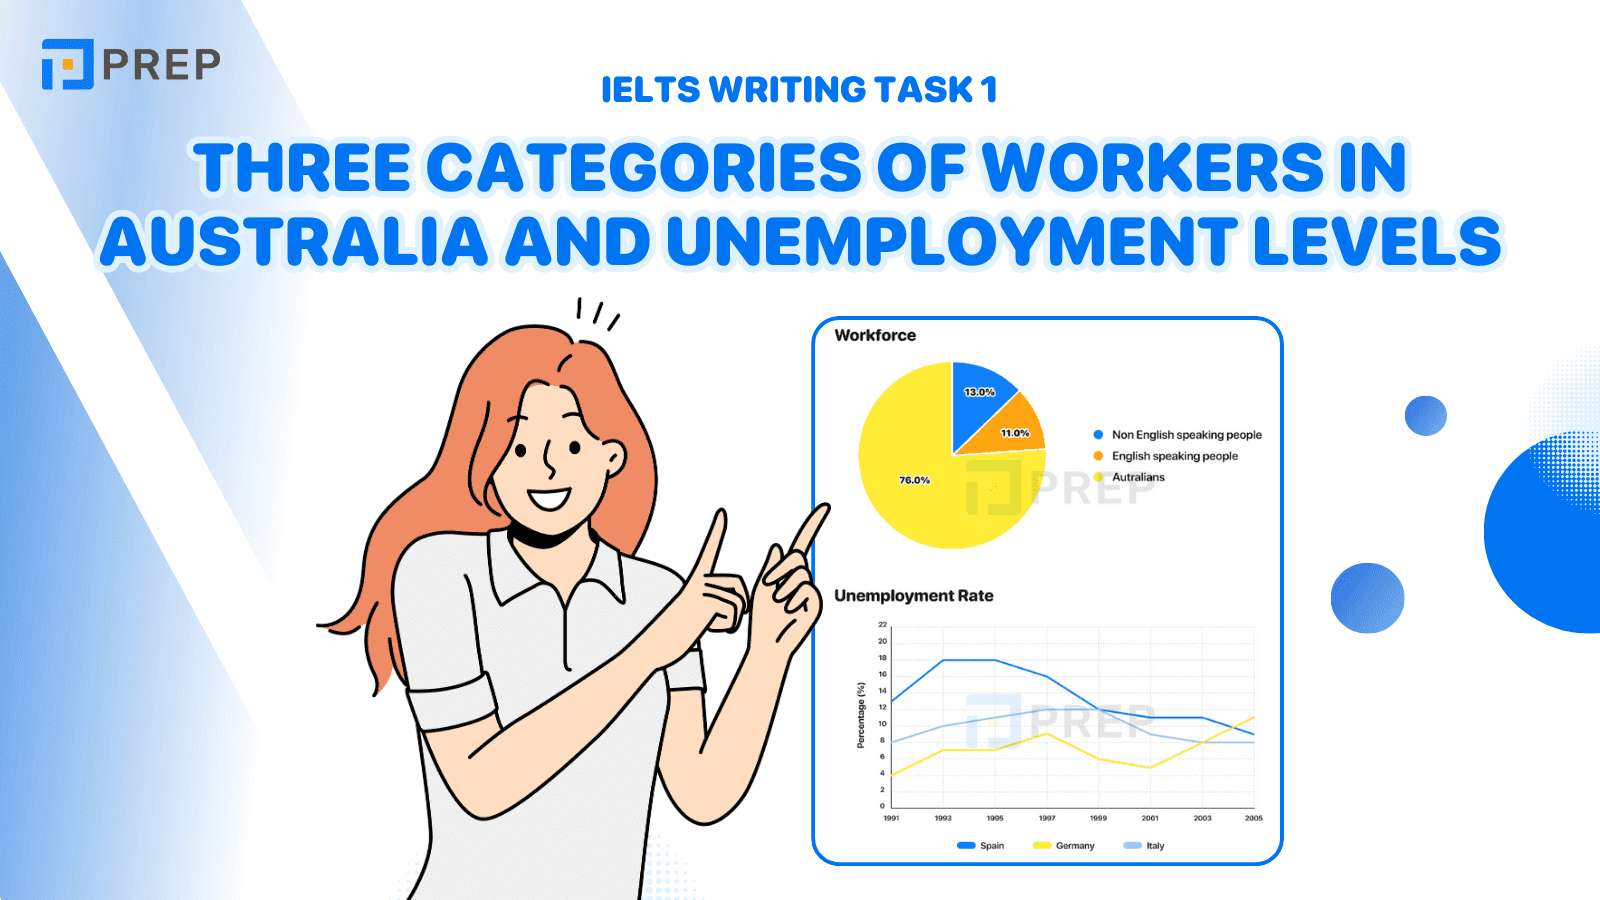 IELTS Writing Task 1 Three categories of workers in Australia and unemployment levels